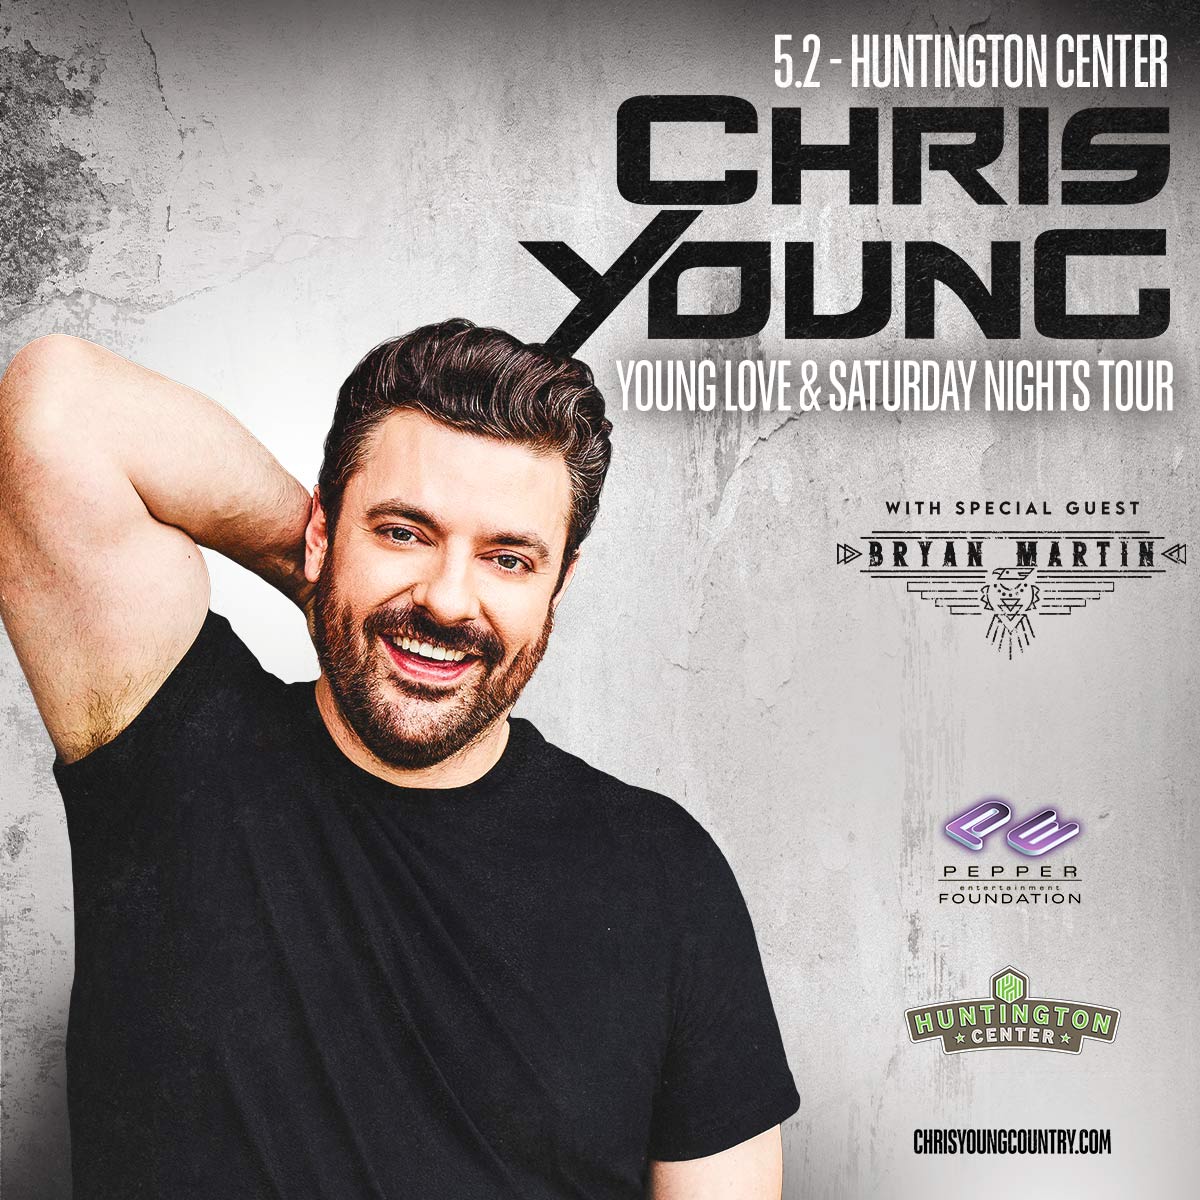 Chris Young – Young Love & Saturday Nights Tour with special guest Bryan Martin Huntington Center | May 2 On sale NOW at the box office and fanlink.to/tSDJ More Details at HuntingtonCenterToledo.com